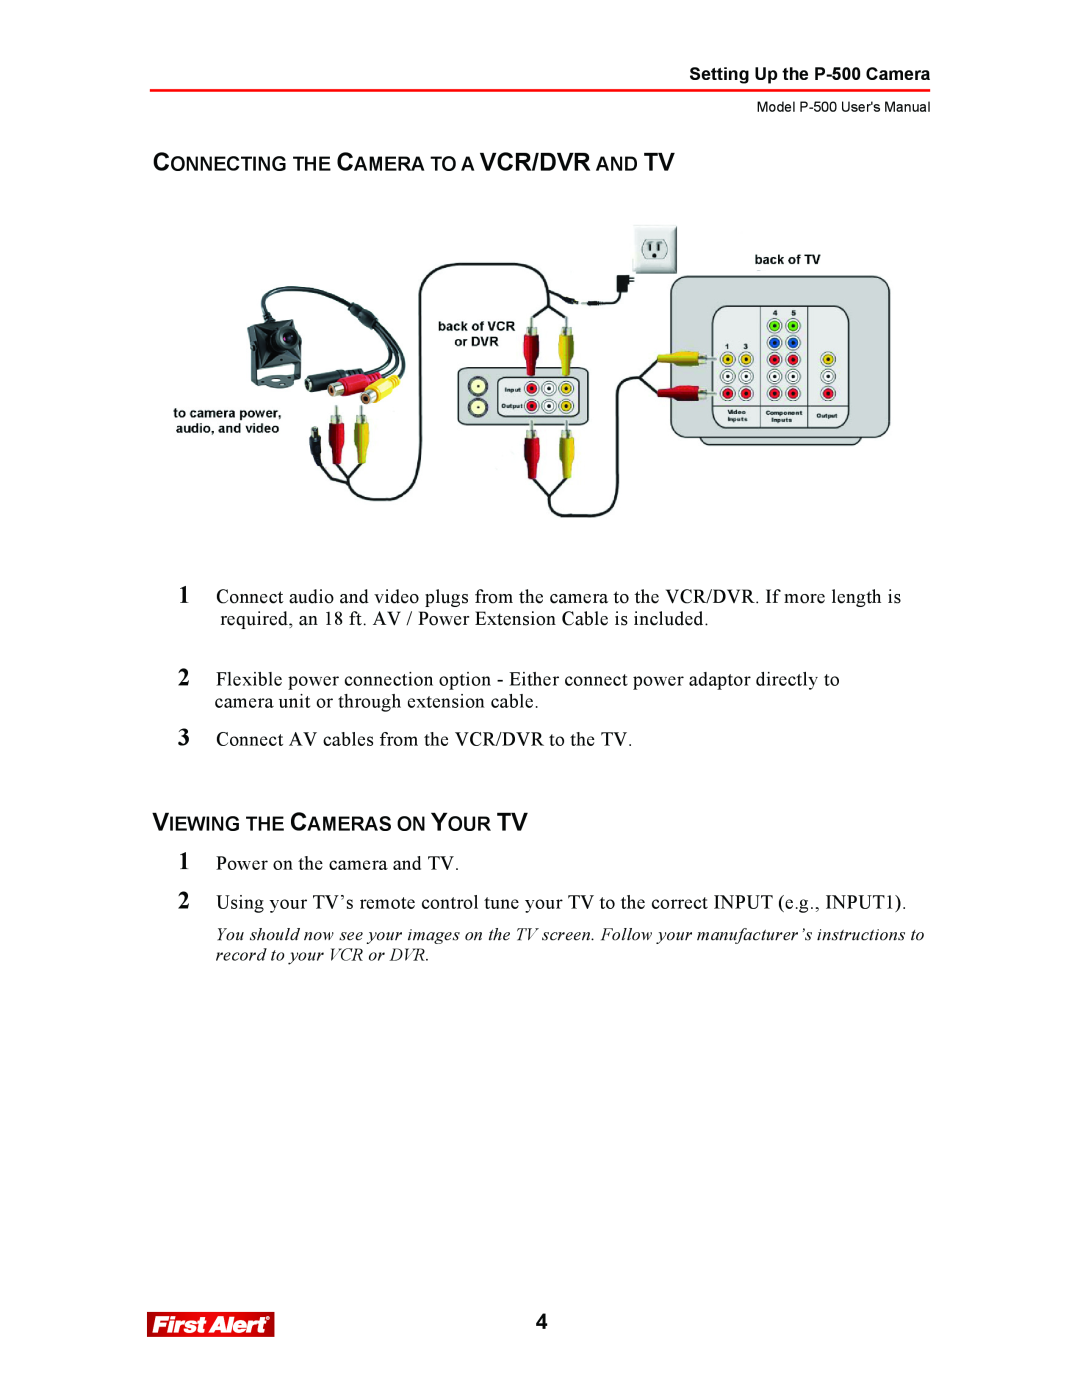 First Alert P-500 user manual Connecting The Camera To A Vcr/Dvr And Tv, Viewing The Cameras On Your Tv 